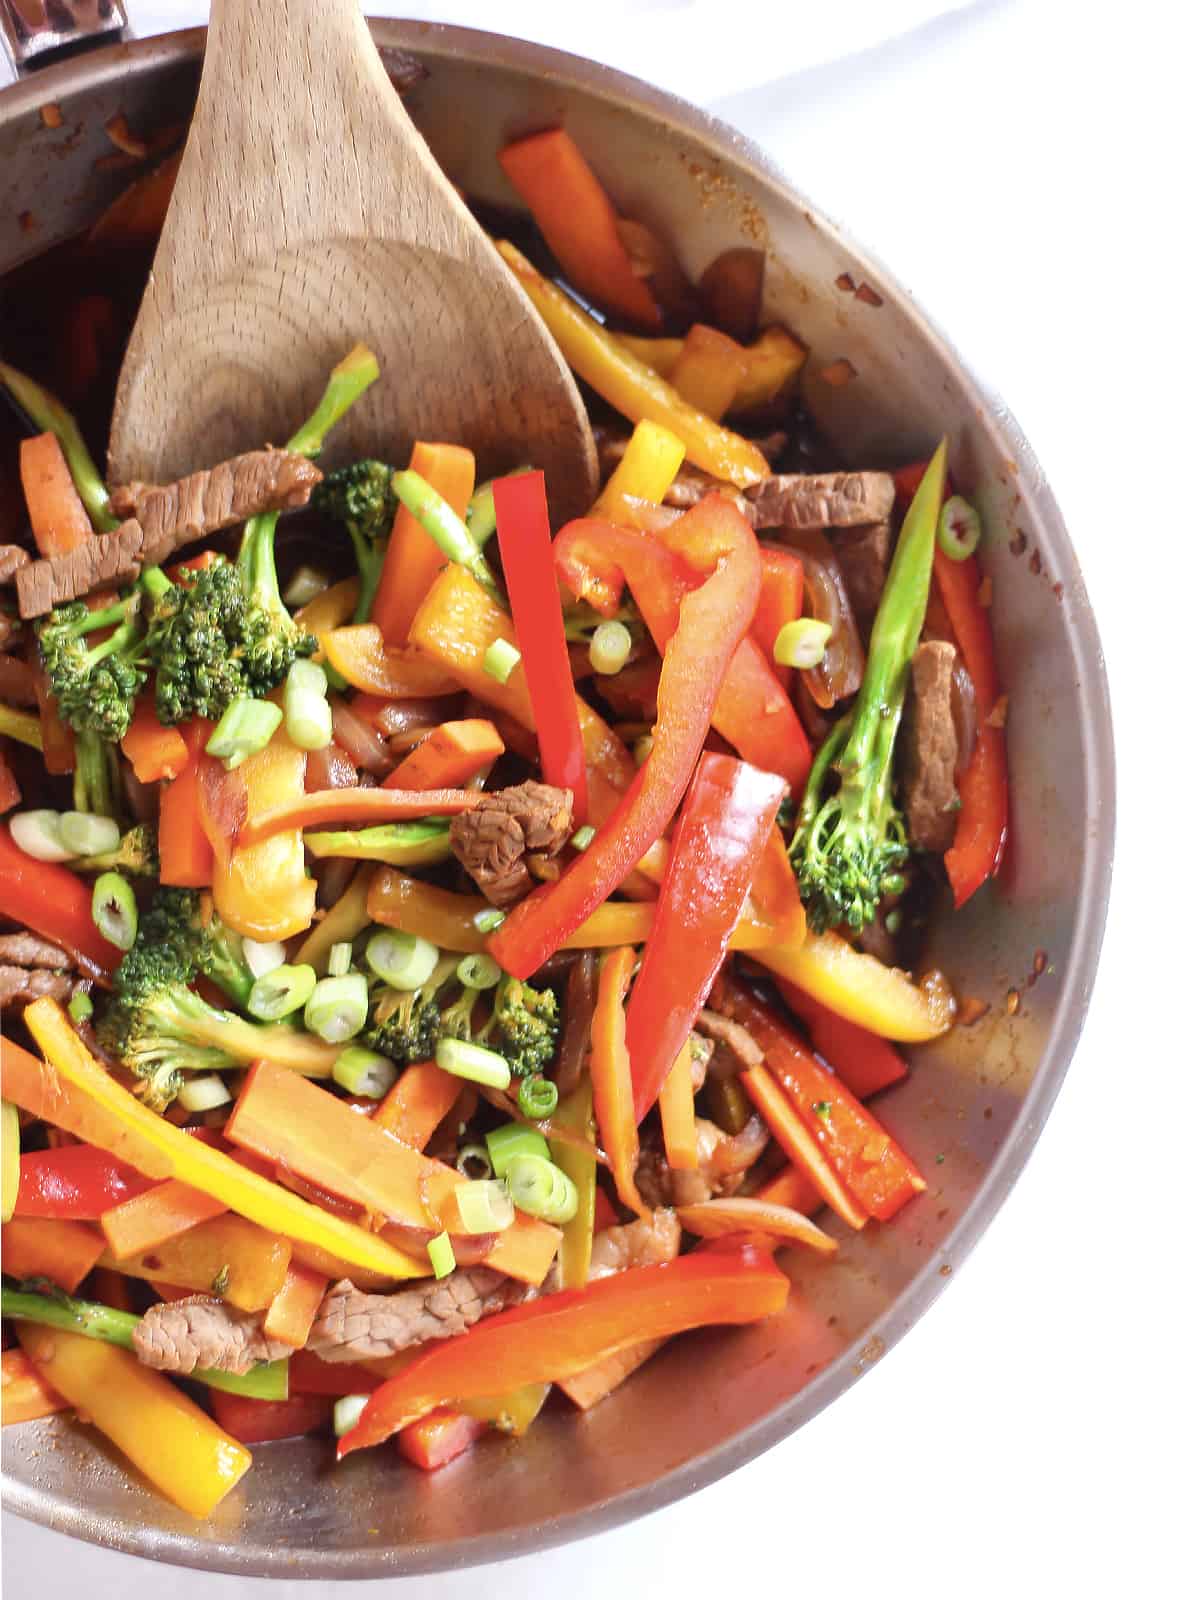 Strips of beef and julienne vegetables in a skillet with a wooden spoon.